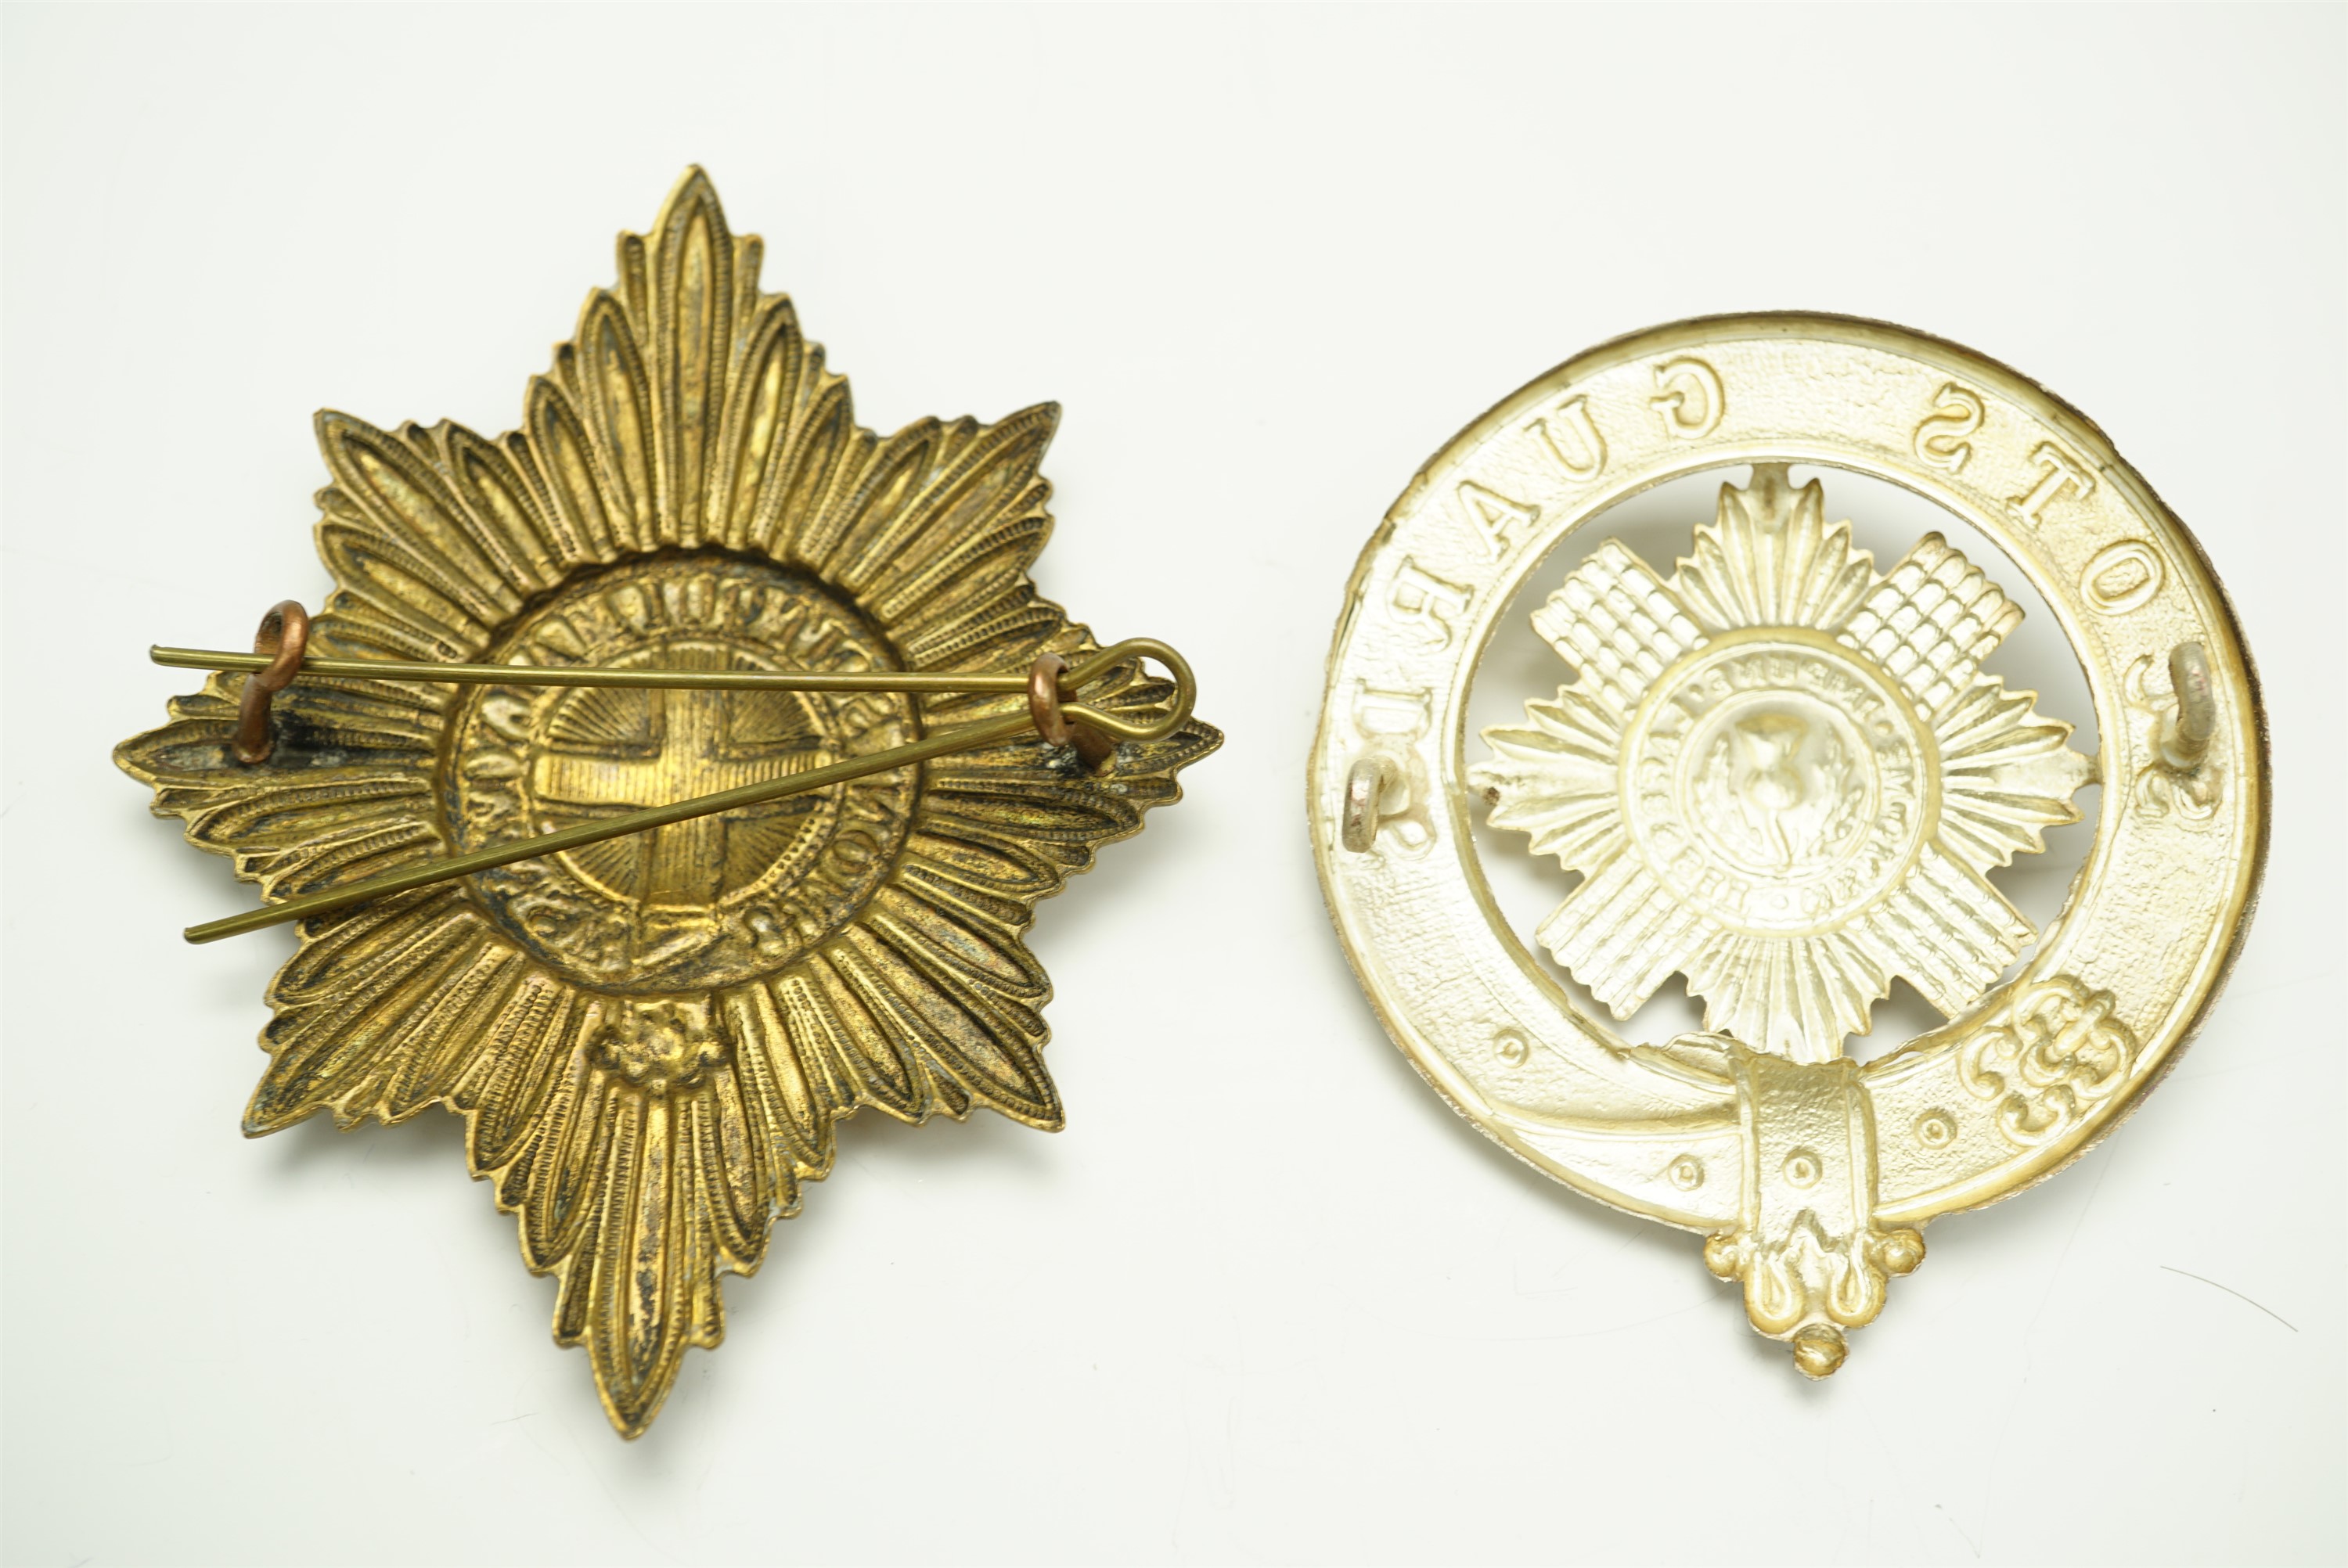 A Scots Guards piper's bonnet badge together with a Coldstream Guards pagri badge - Image 2 of 2